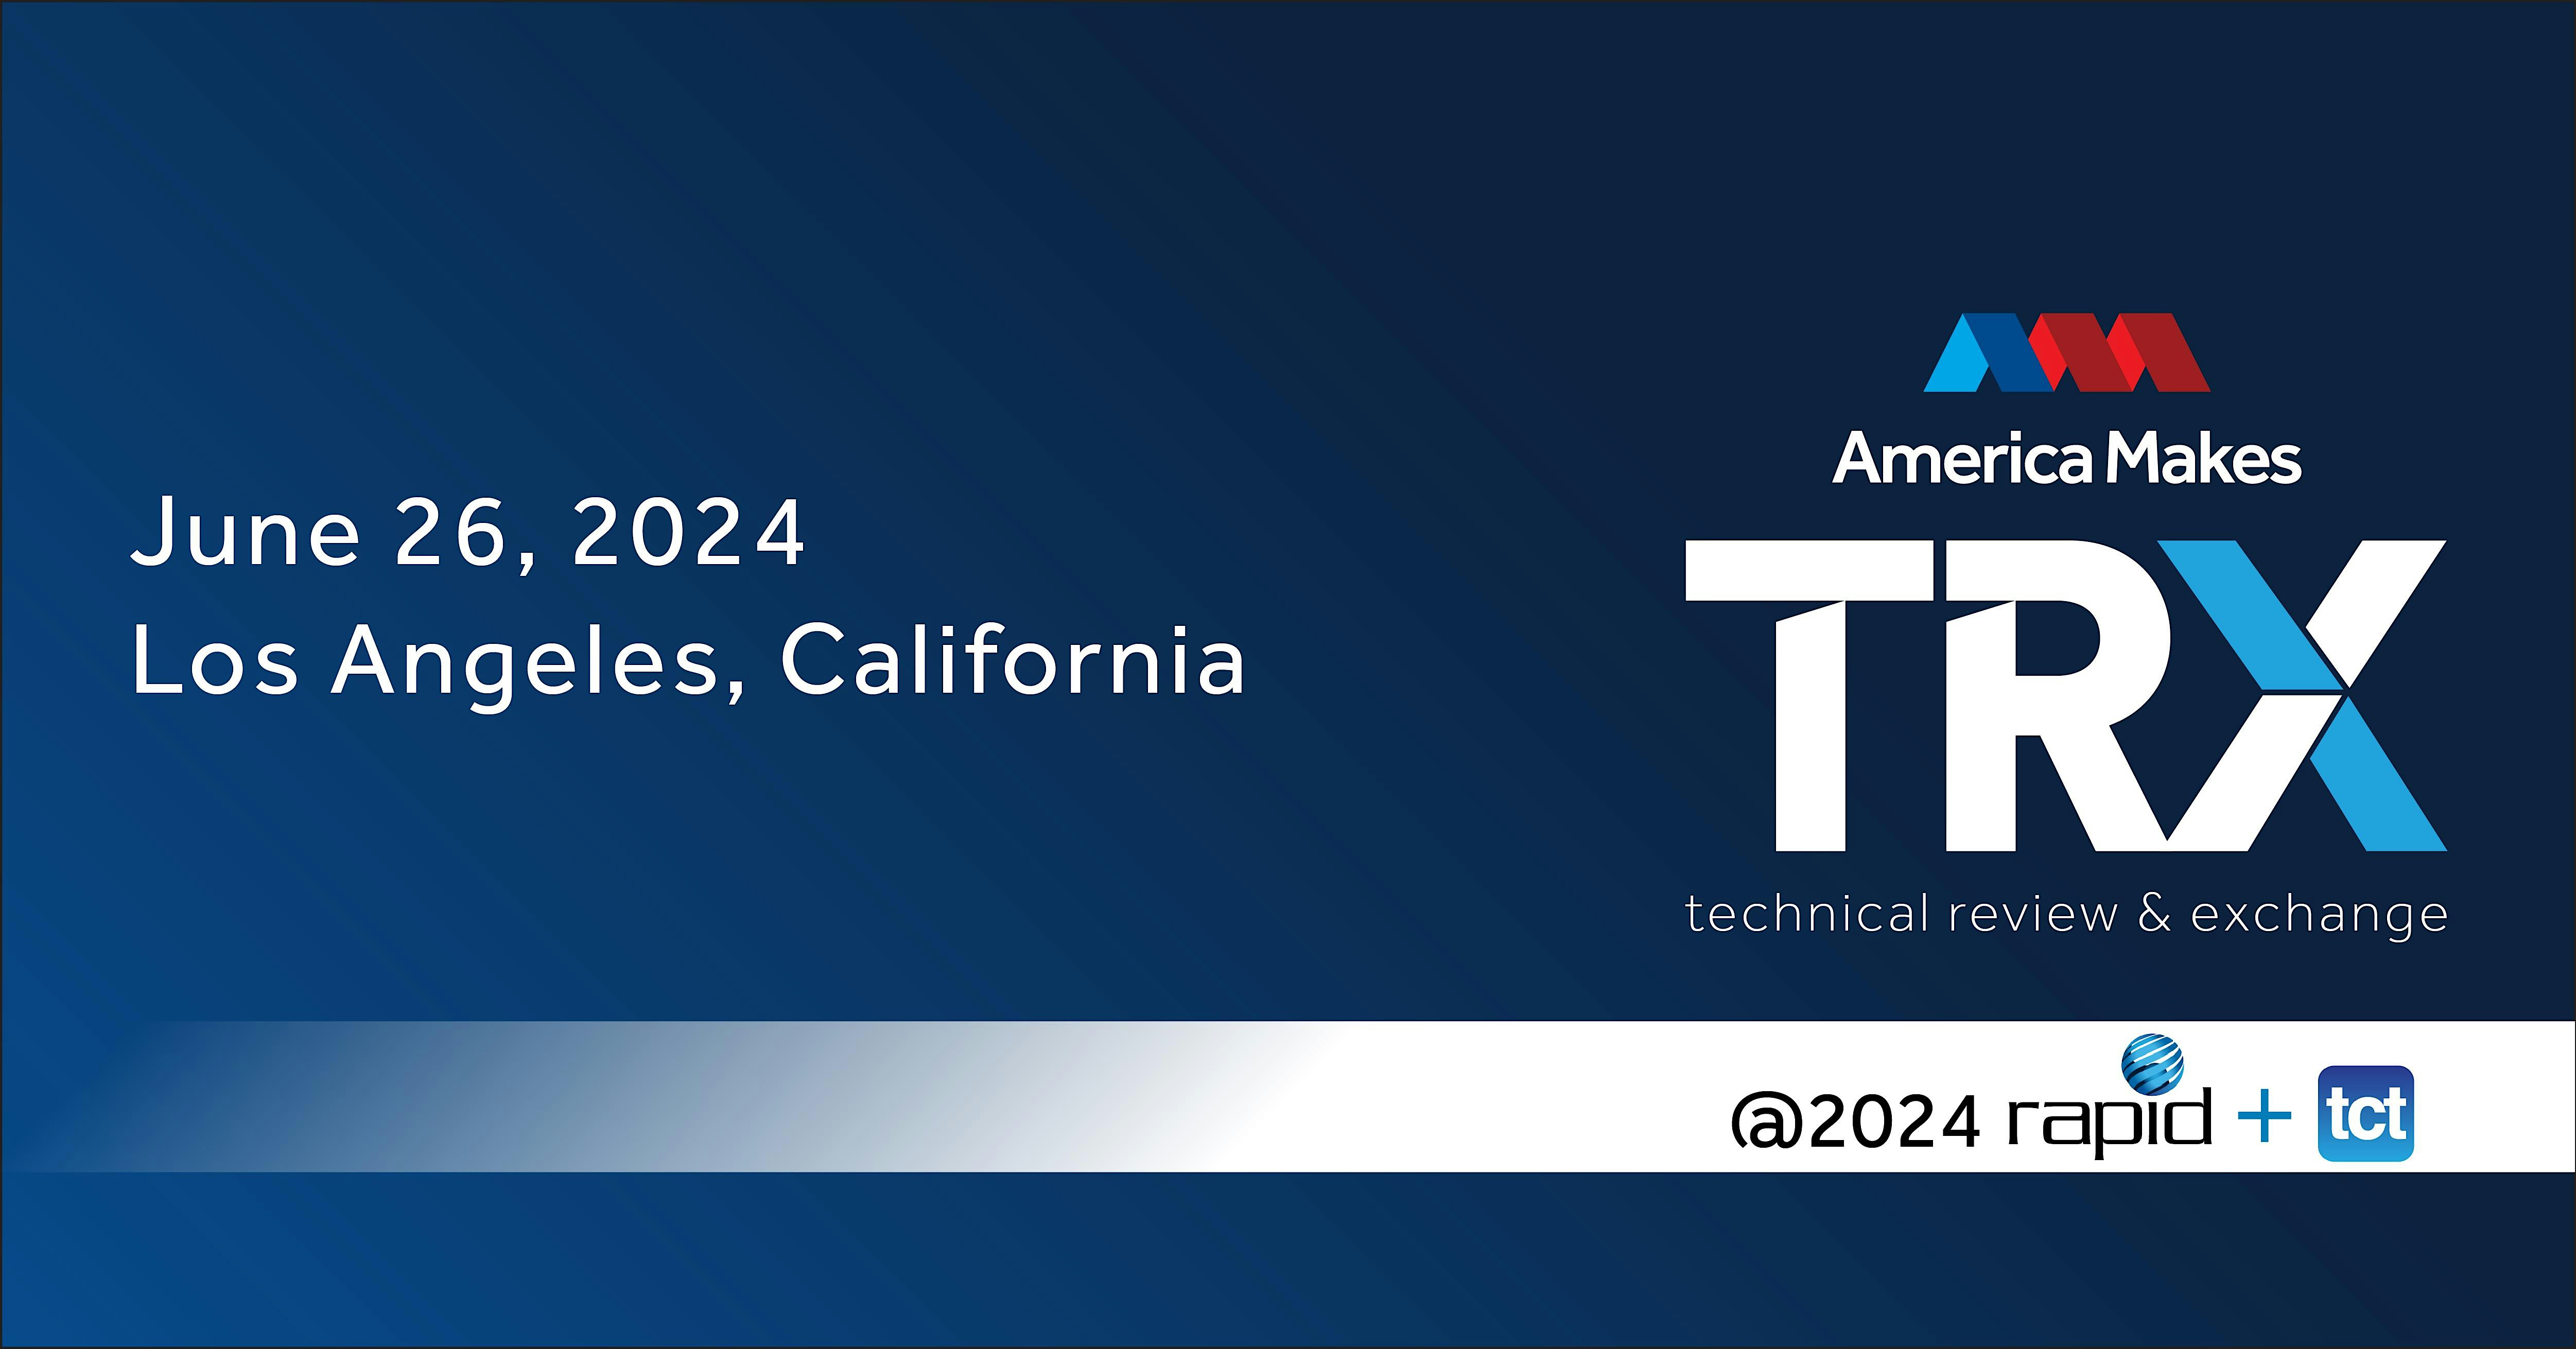 America Makes TRX Hosted by RAPID + TCT